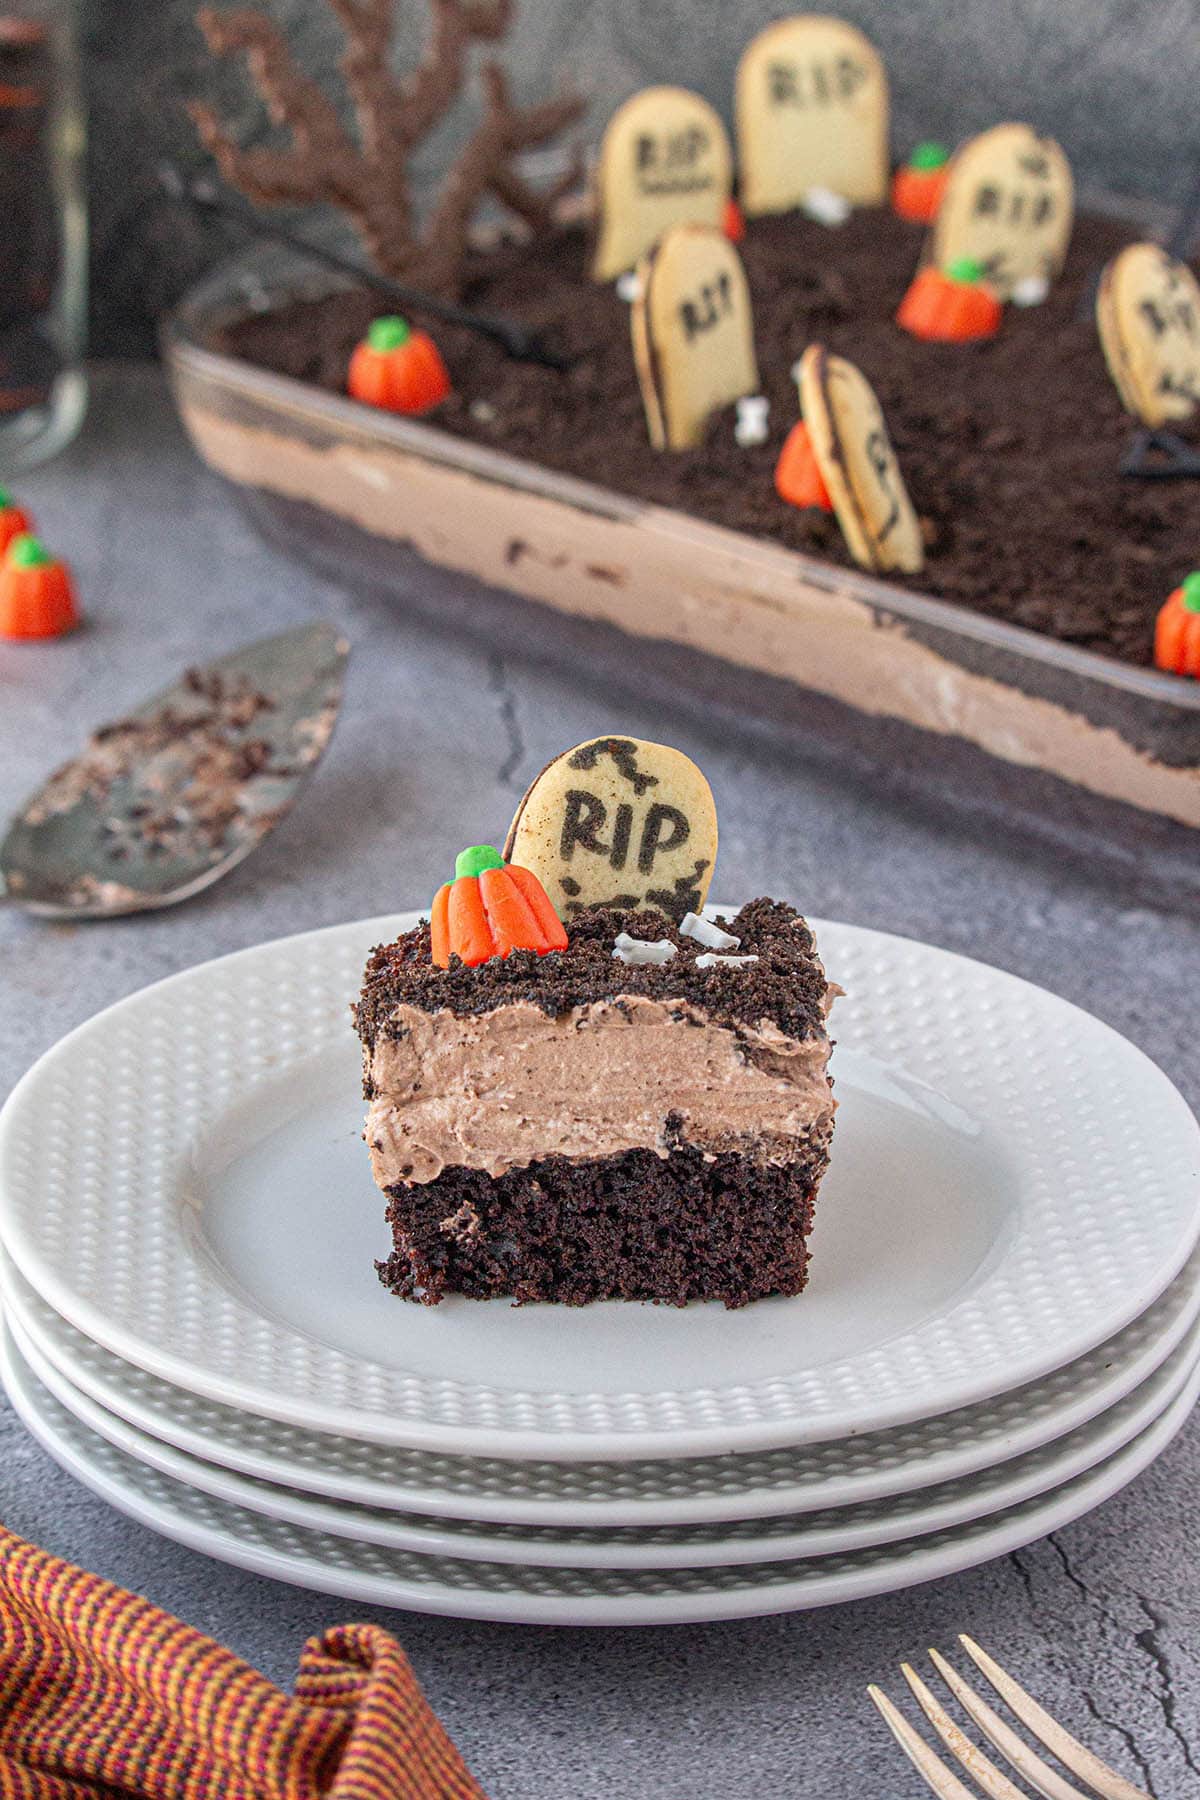 A slice of chocolate cake decorated for halloween on a plate.